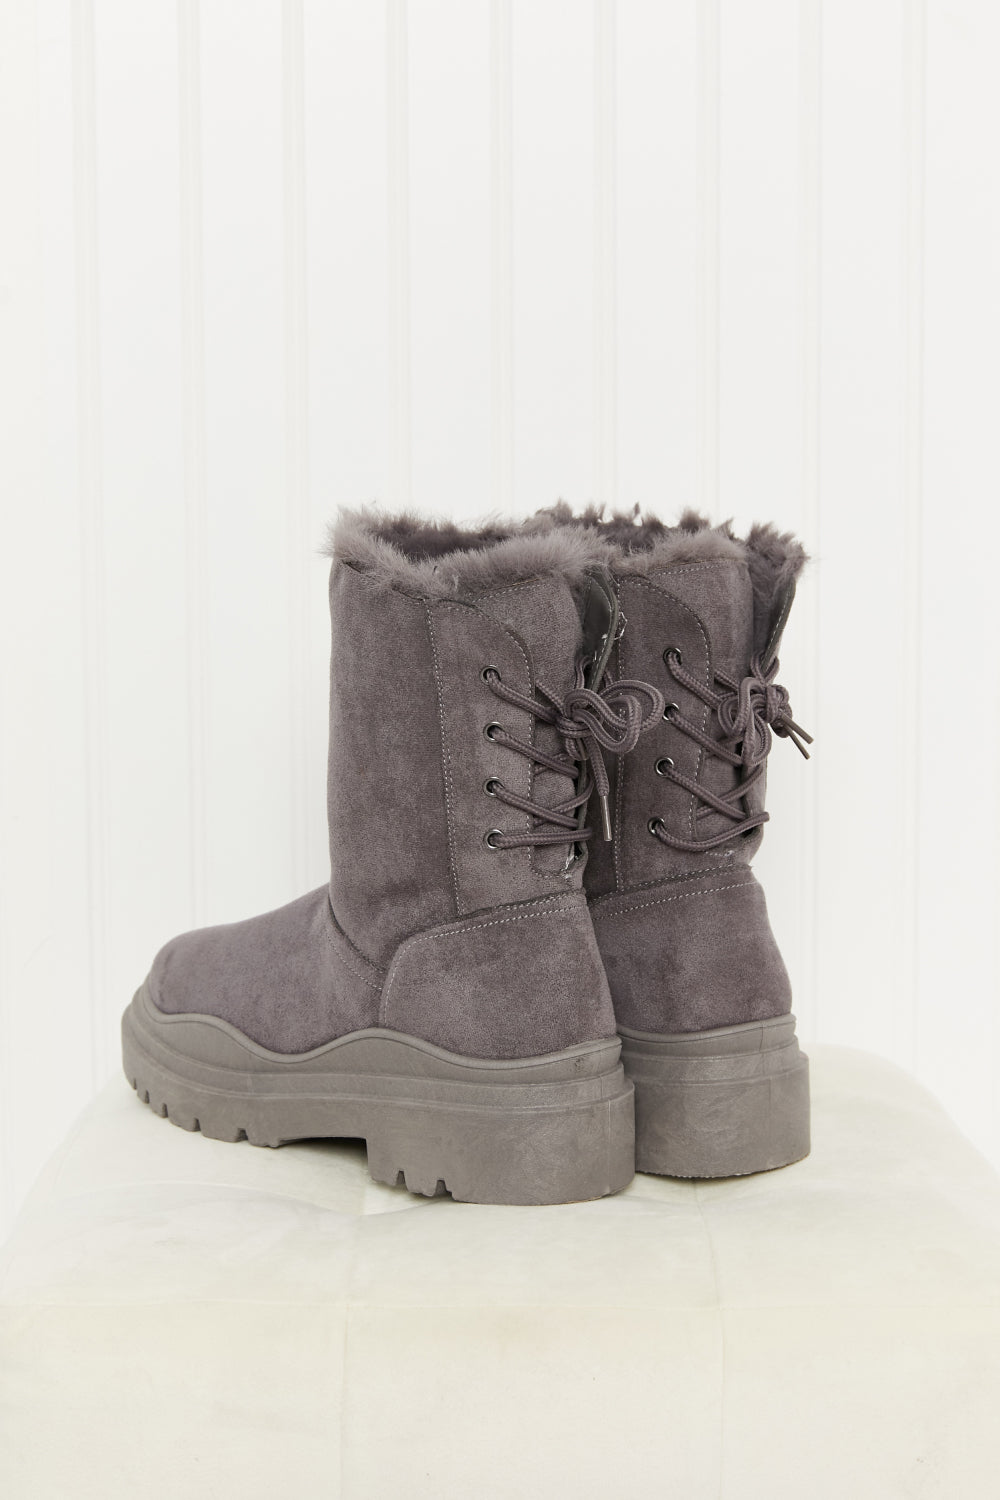 Legend Snowfall Lace-Up Faux Fur Lined Boots